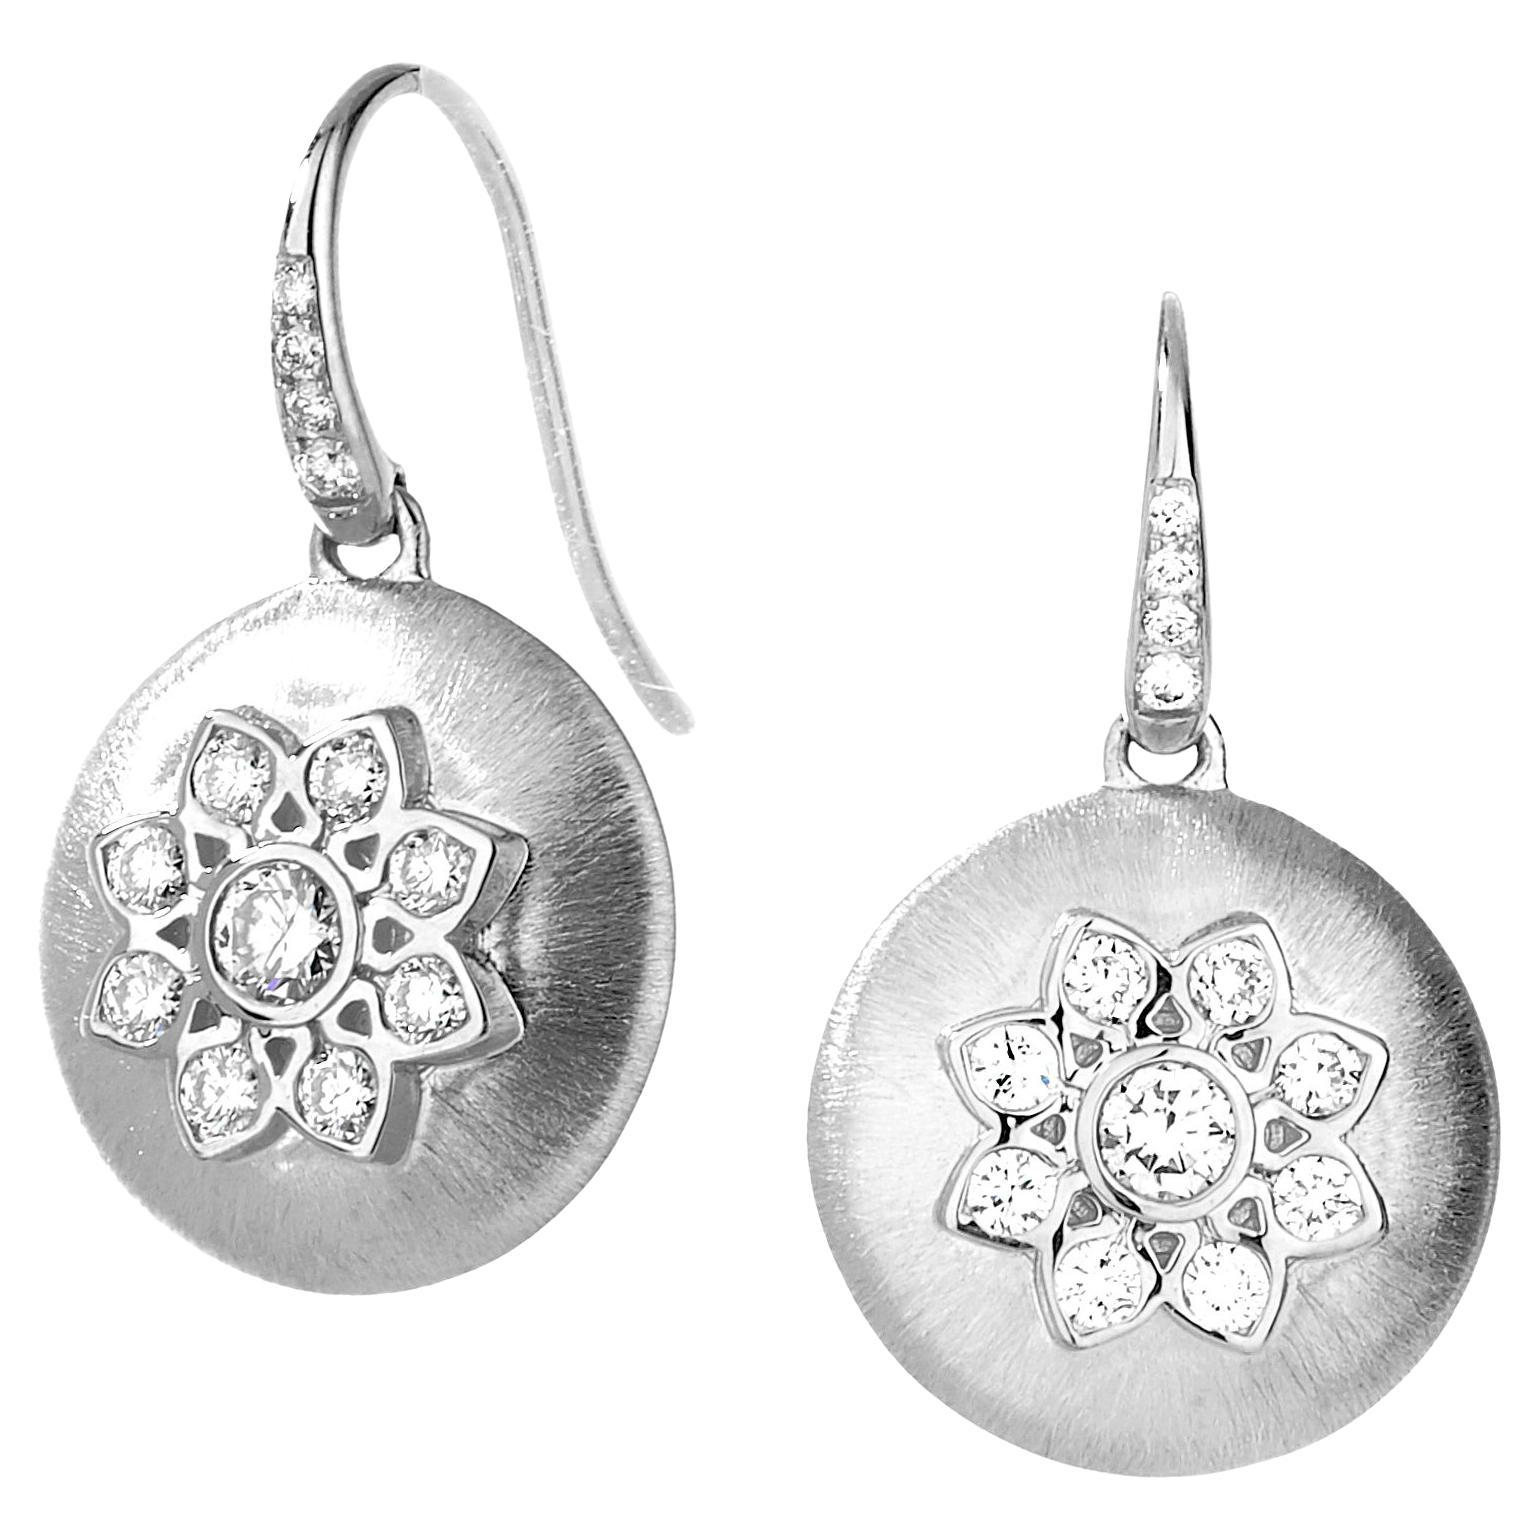 Syna Sterling Silver Flower Earrings with Diamonds